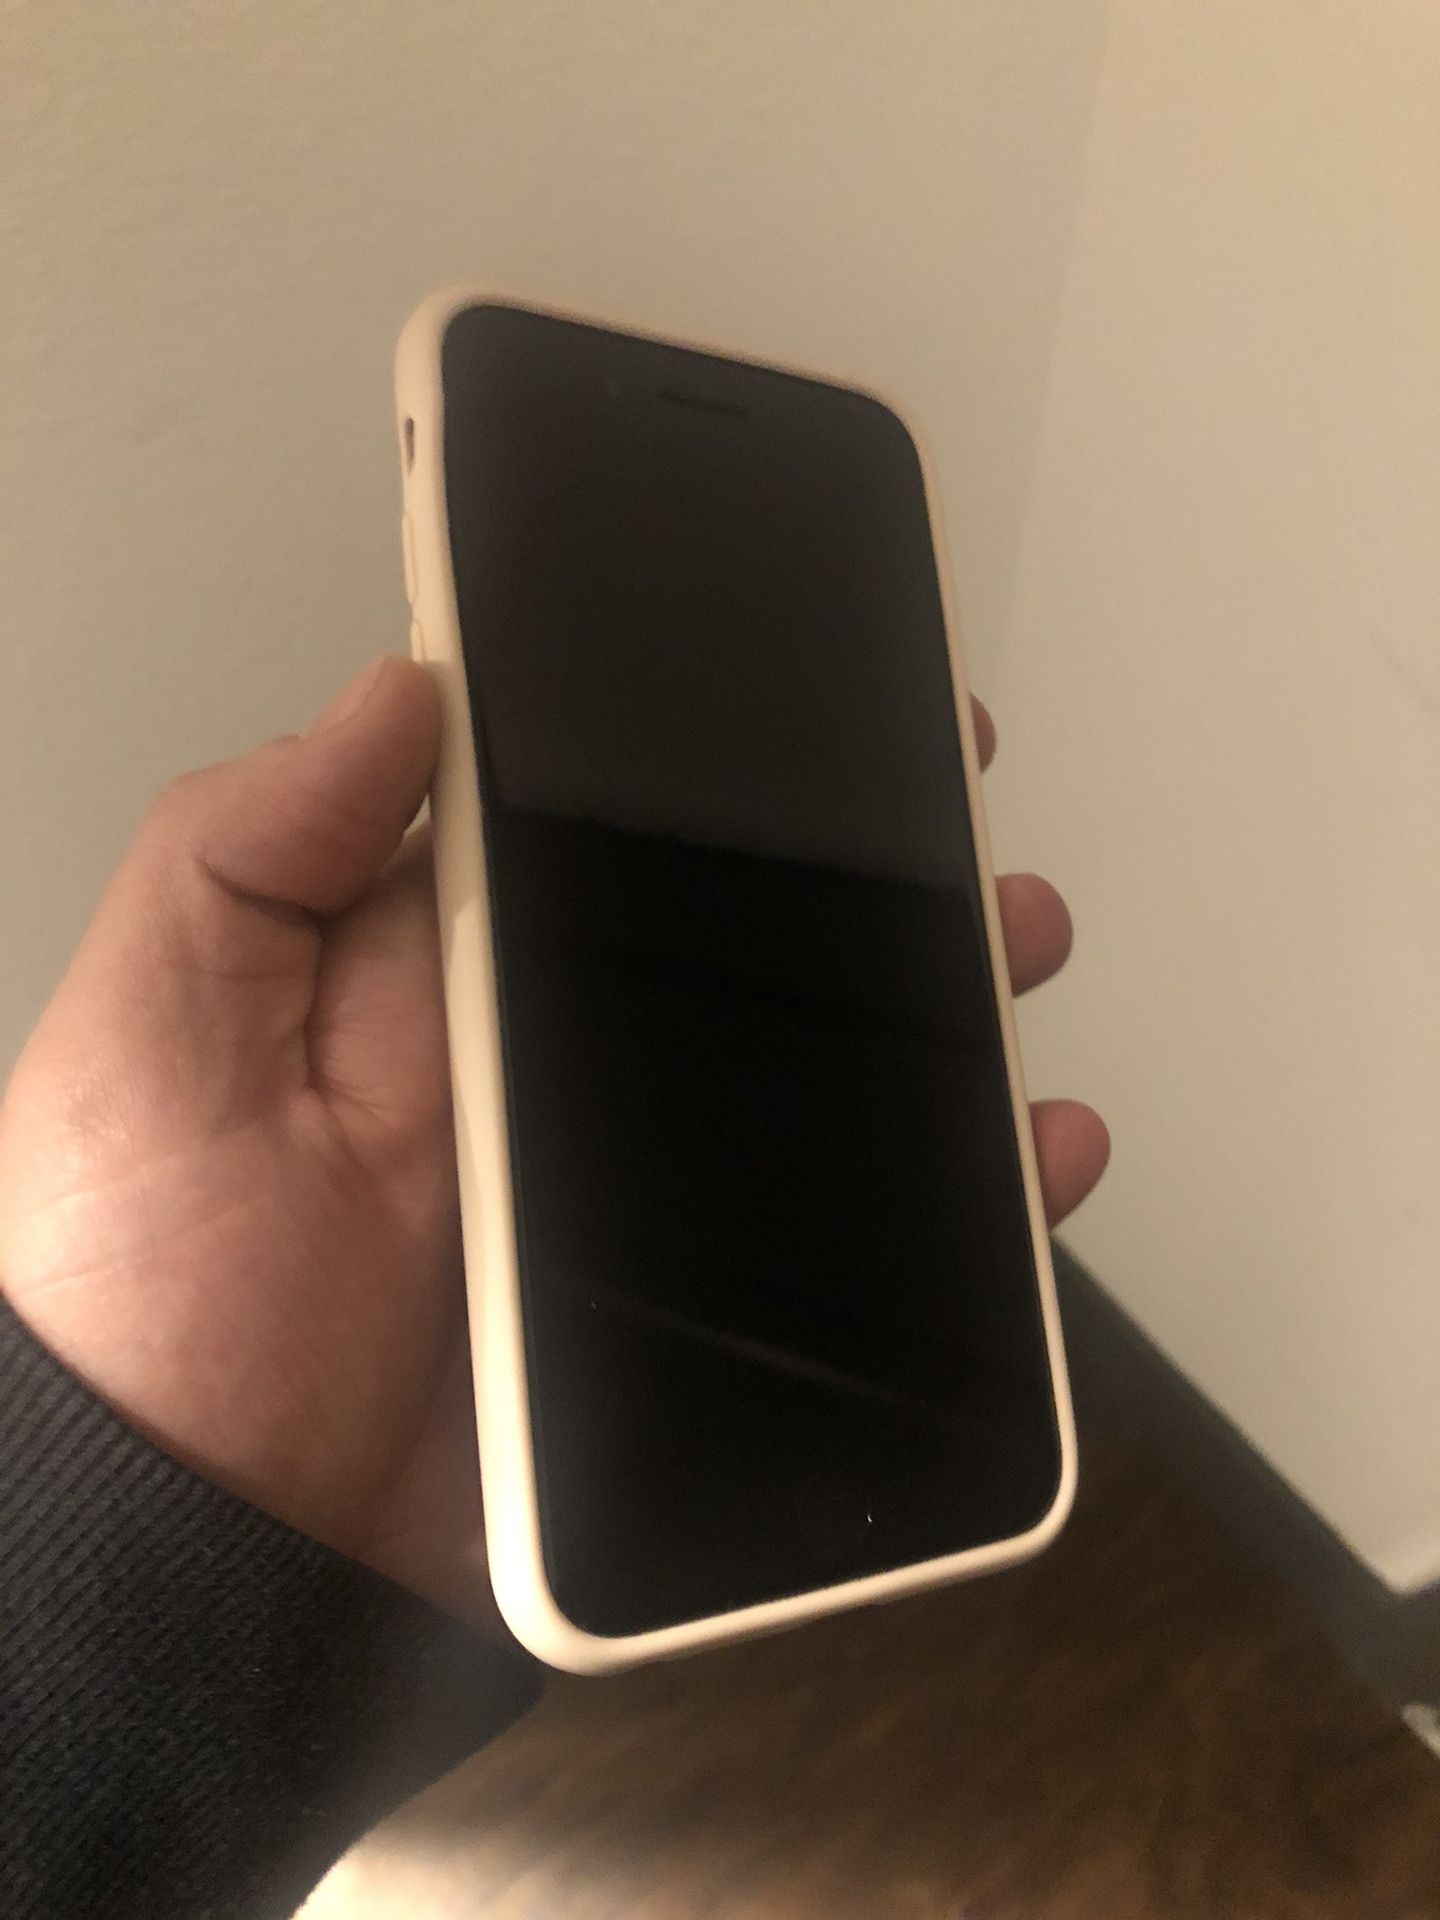 IPhone 8+ plus 64gb very clean condition UNLOCKED to all carriers